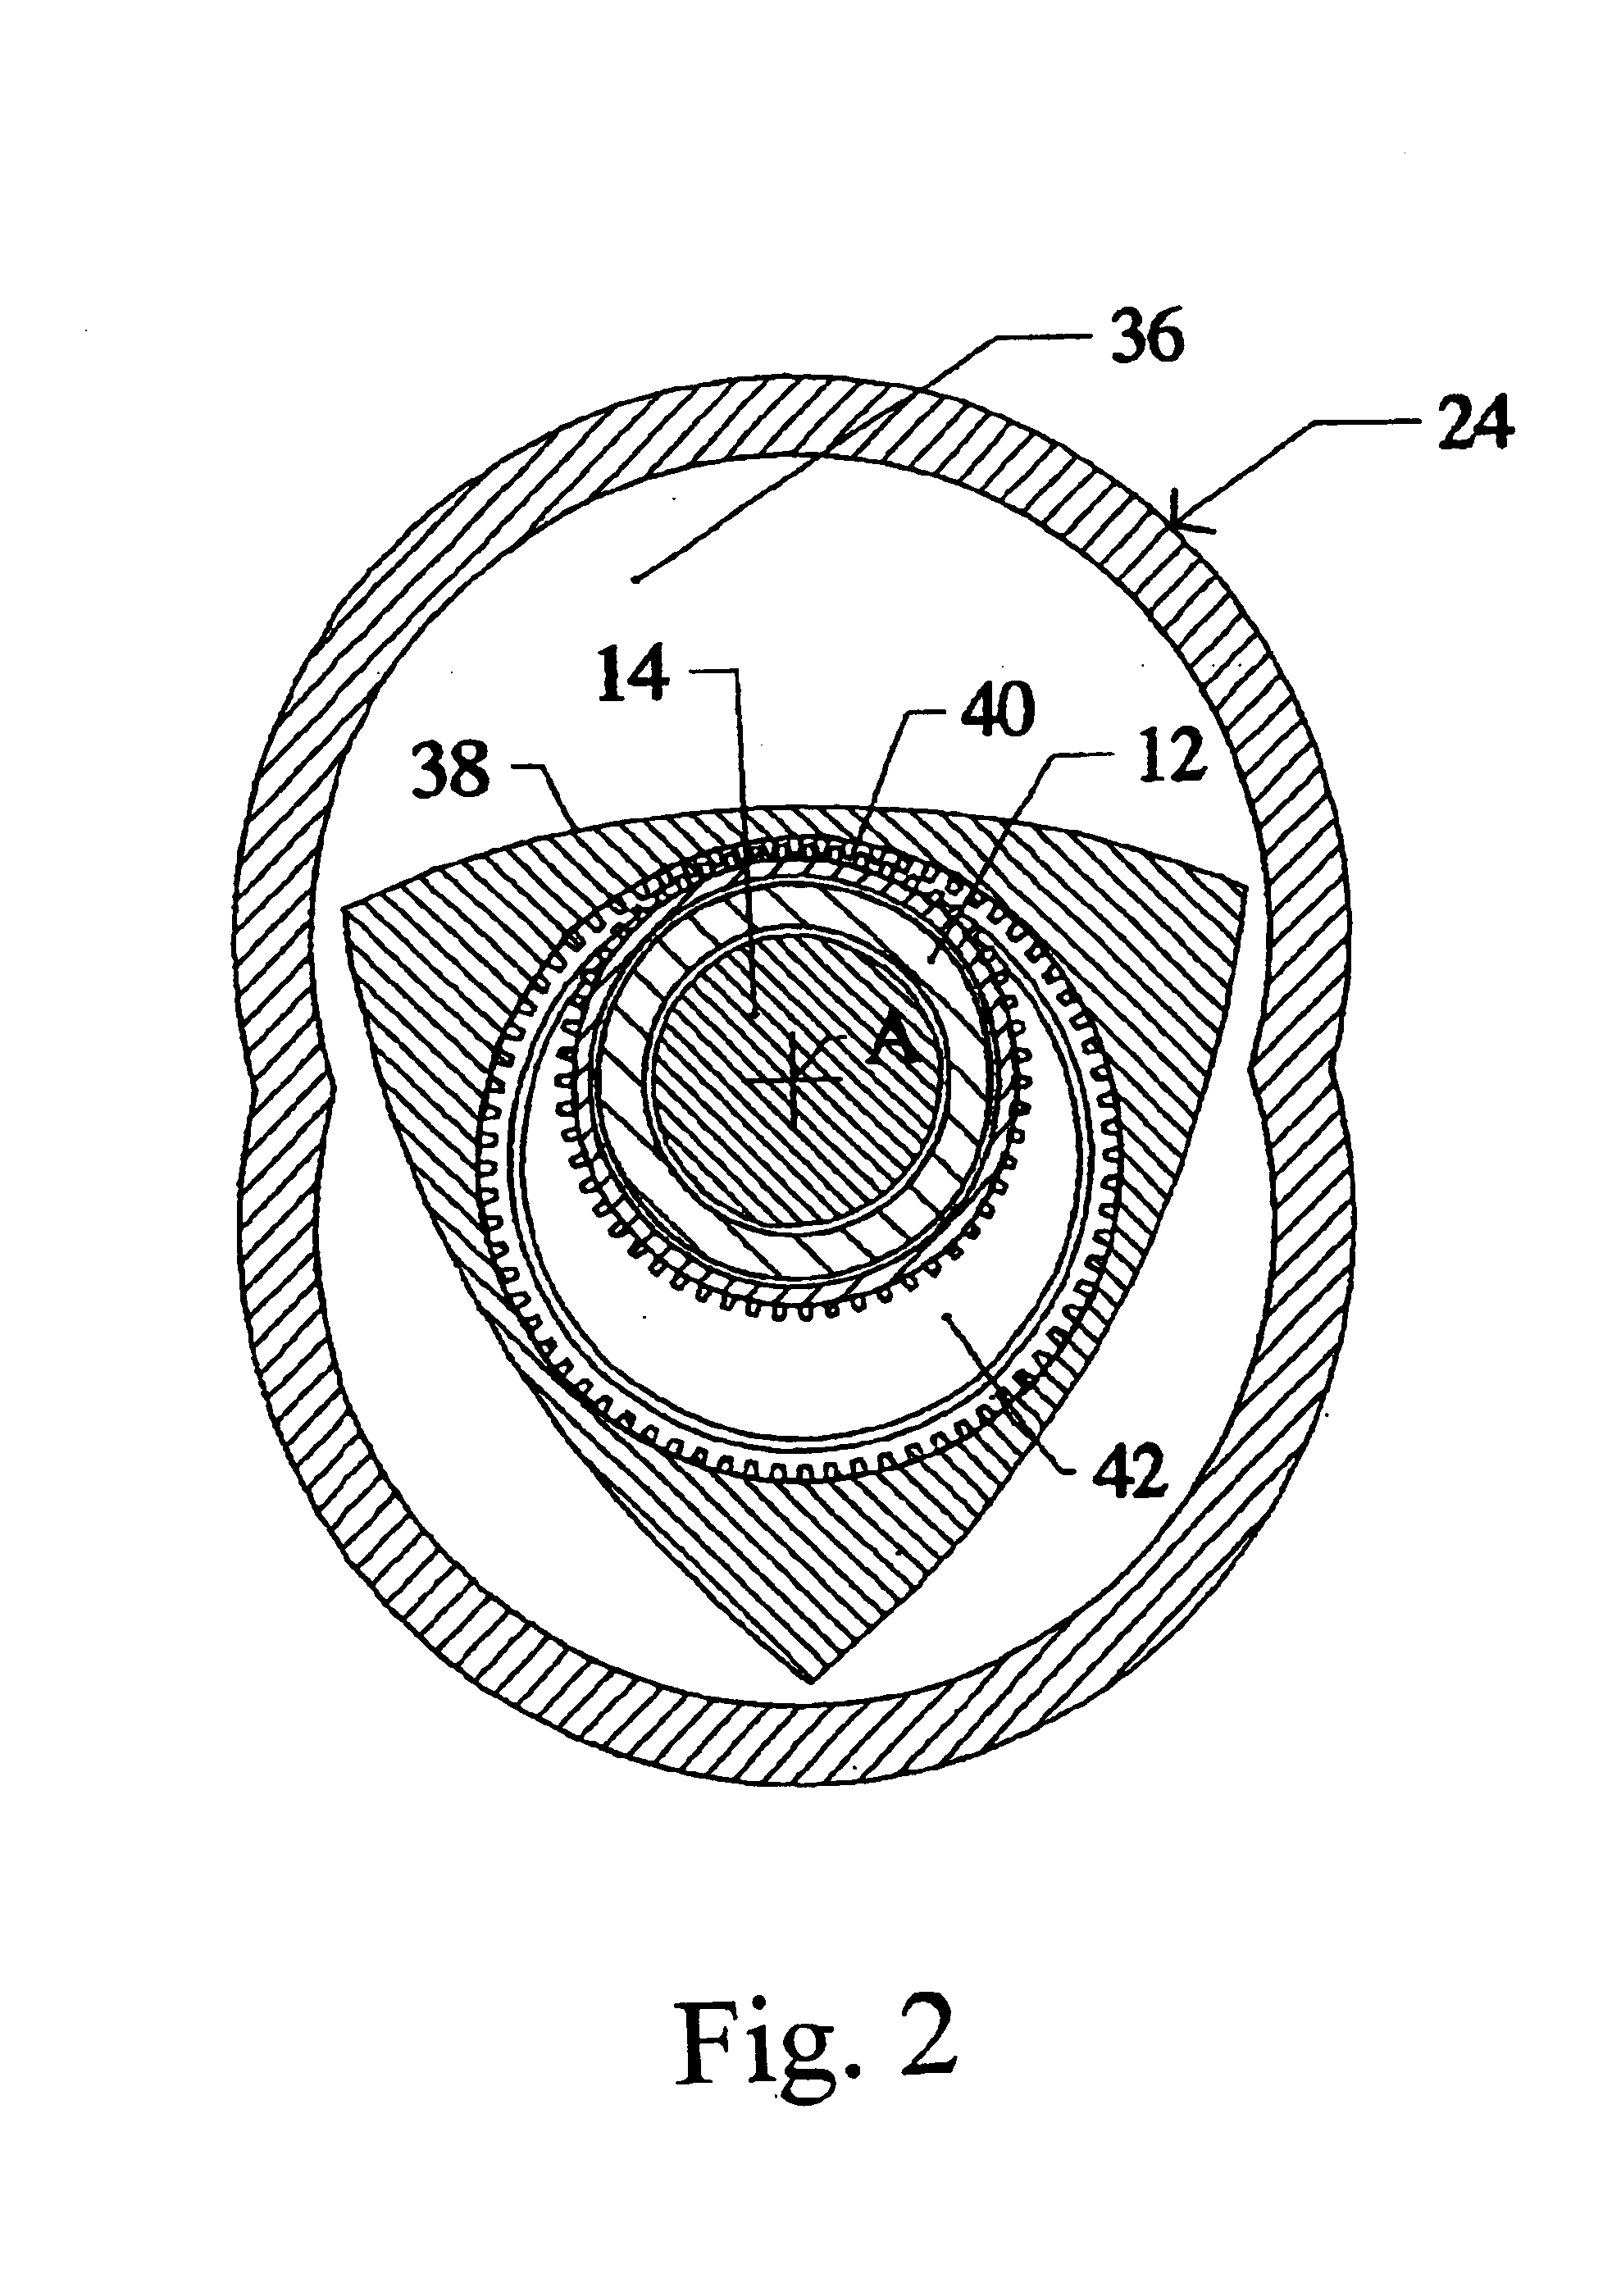 Rotary engine with counter-rotating housing and output shaft mounted on stationary spindle